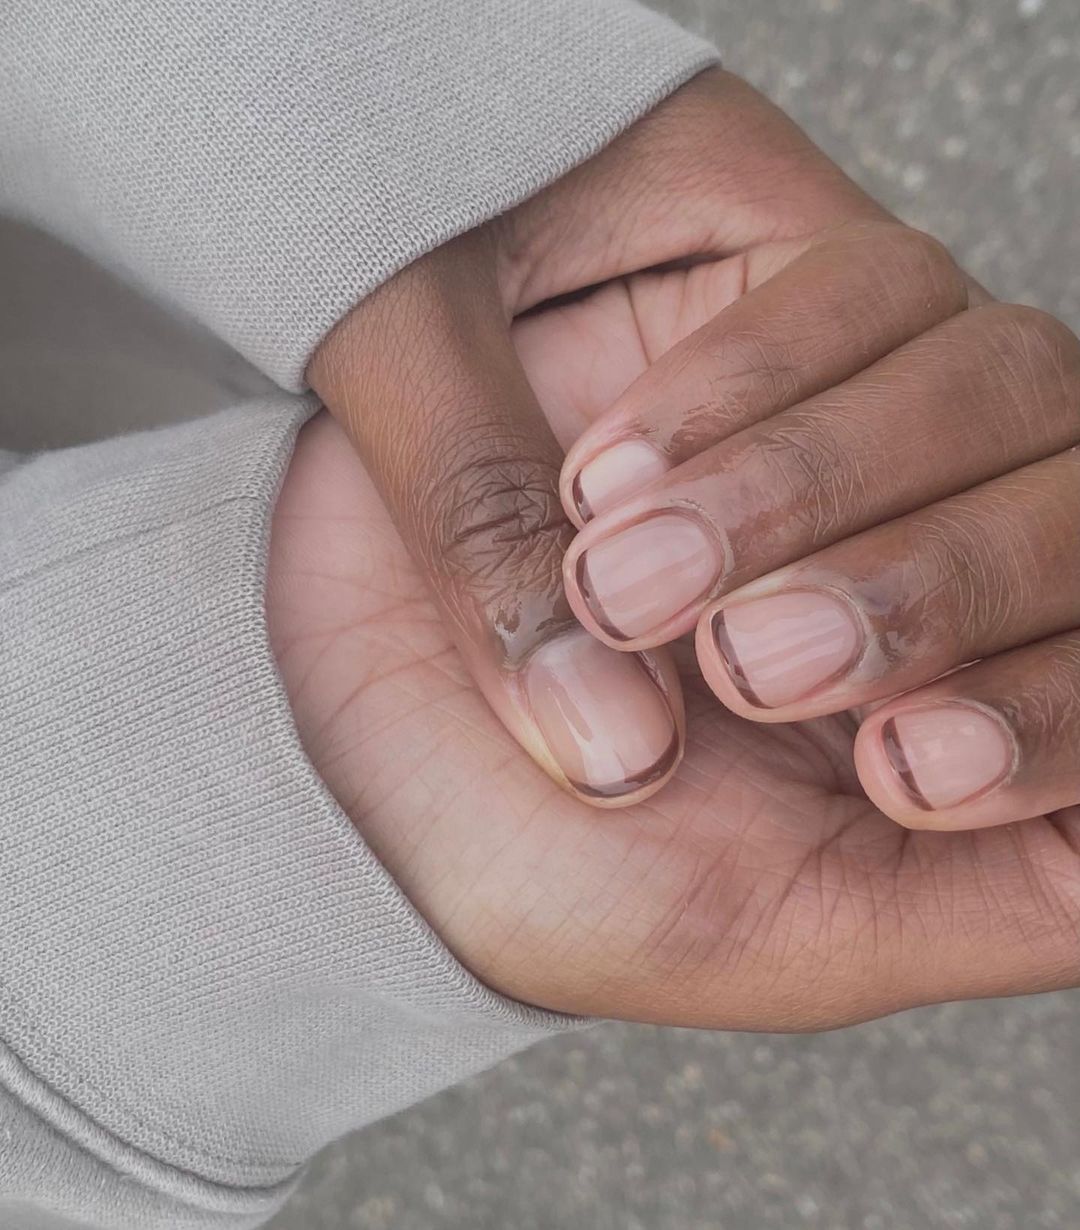 Colourful French manicures: Neutral Tones